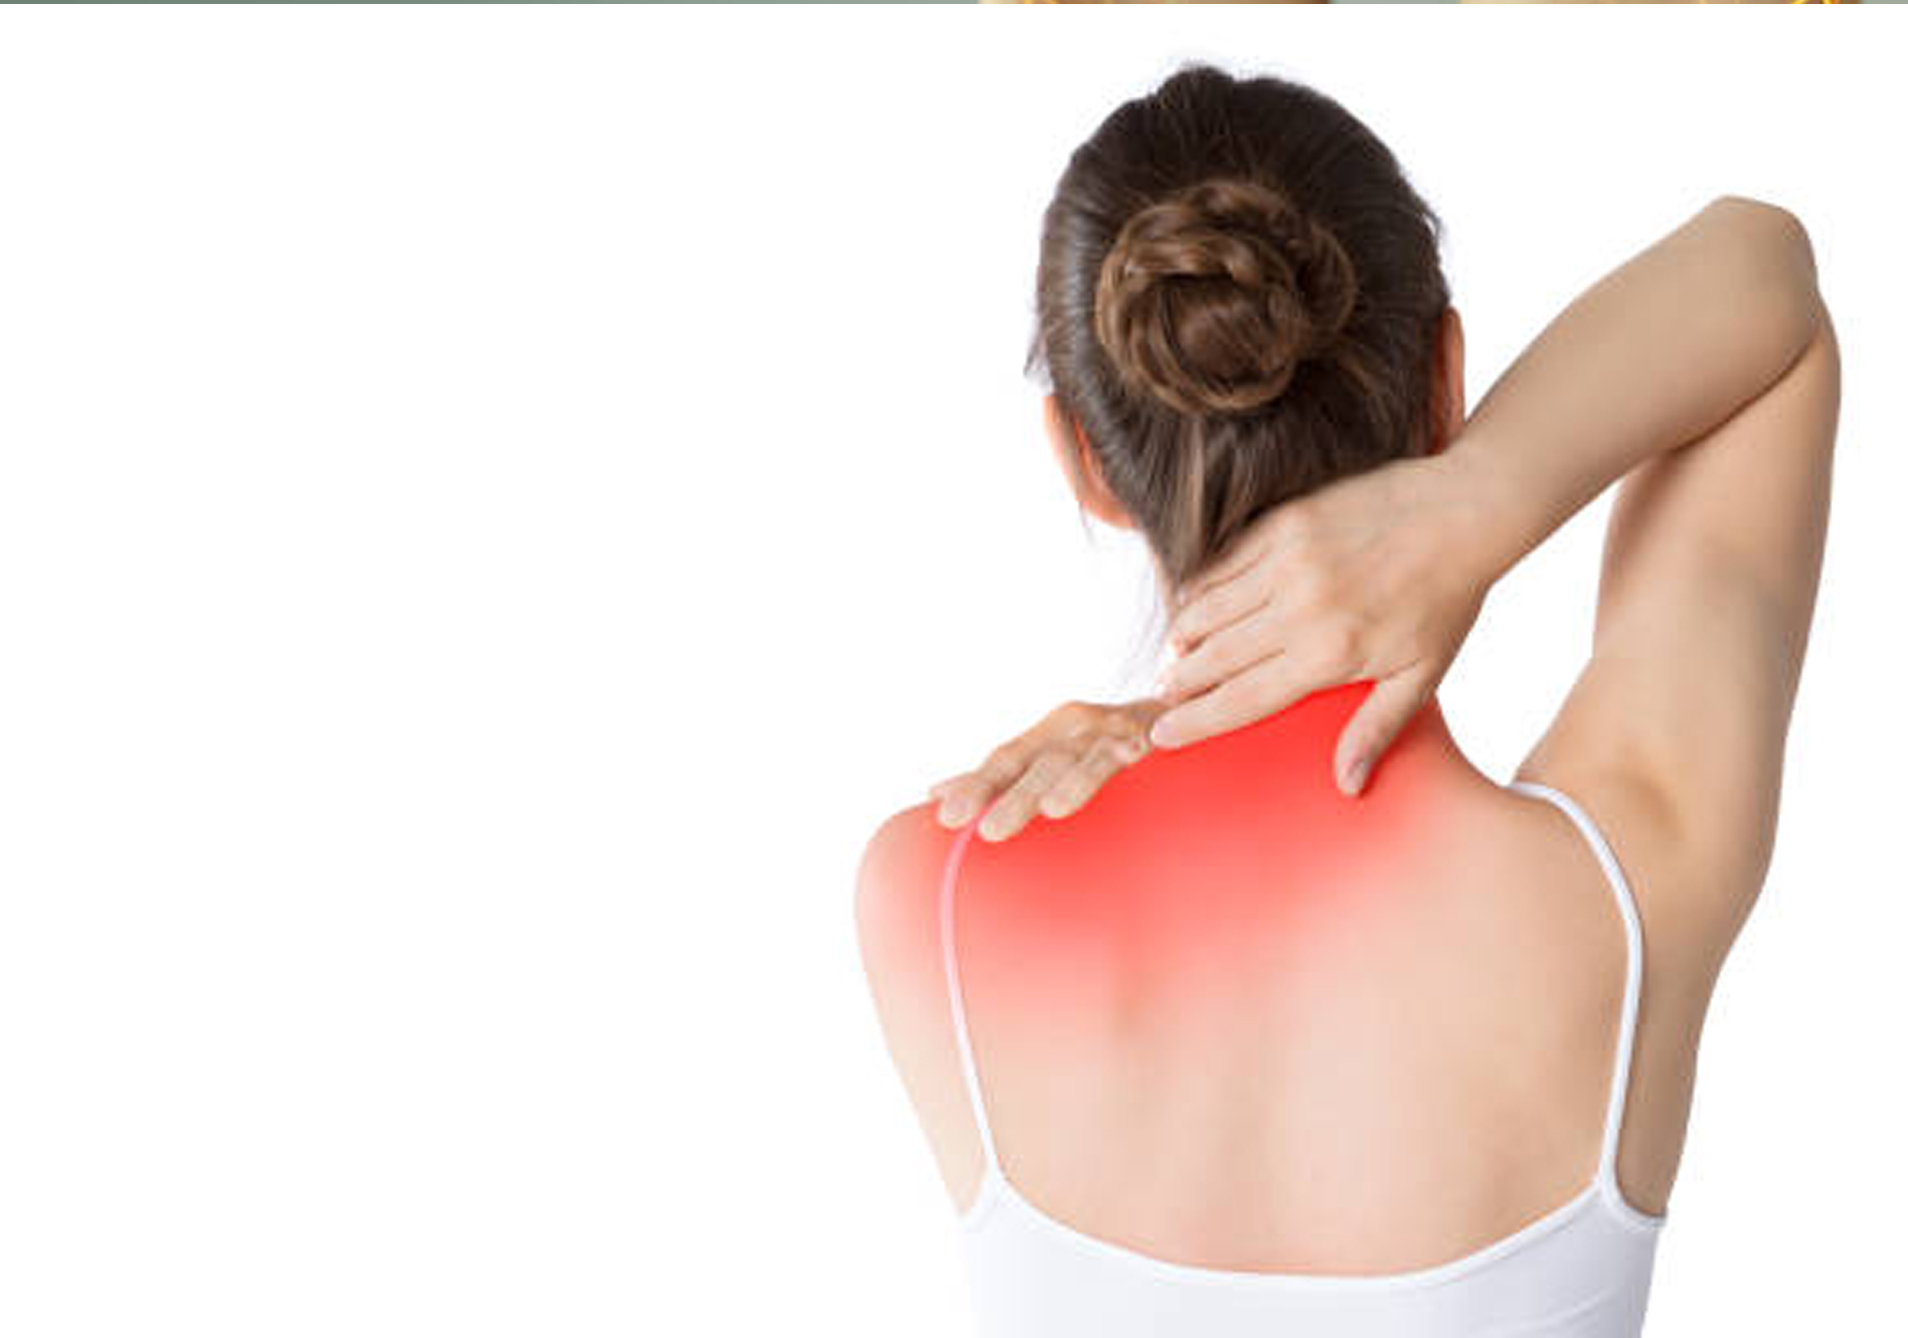 Cervical Pain: Causes, Treatment and Prevention